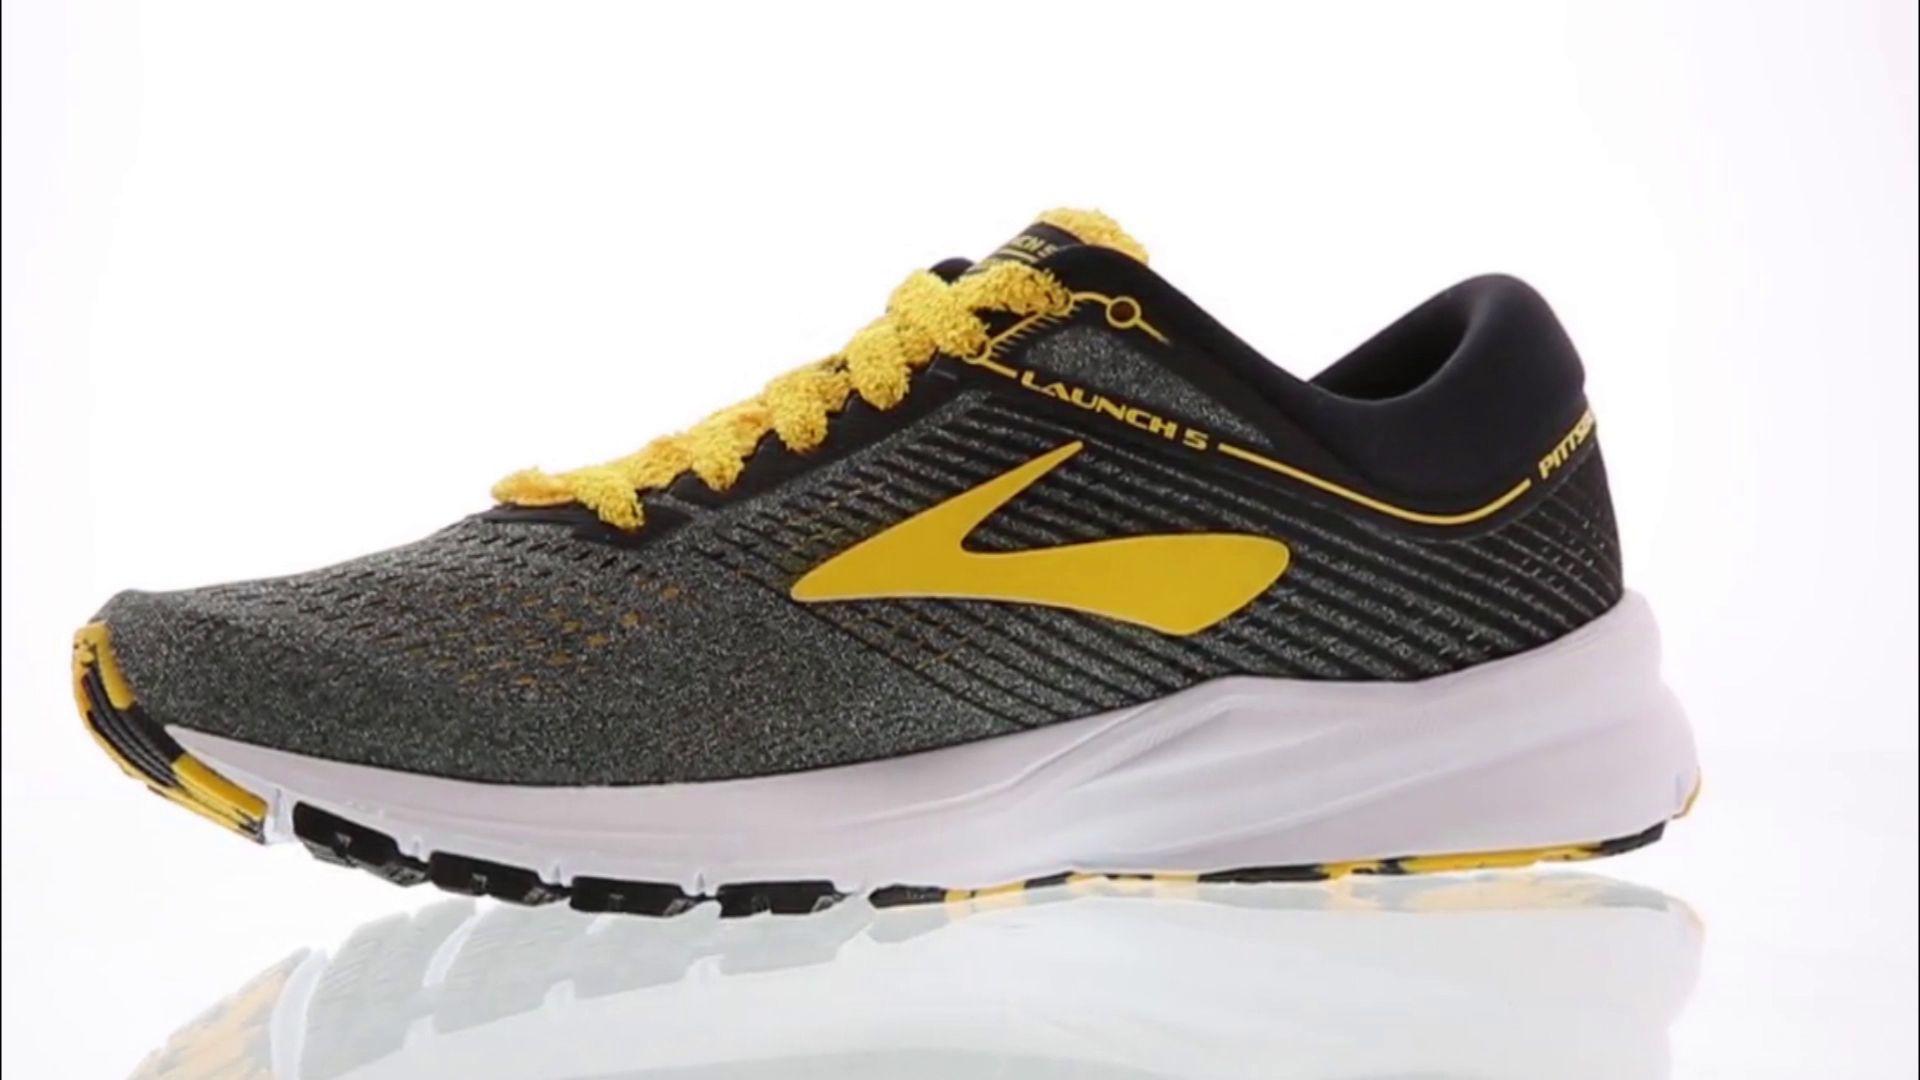 brooks launch 6 pittsburgh cheap online